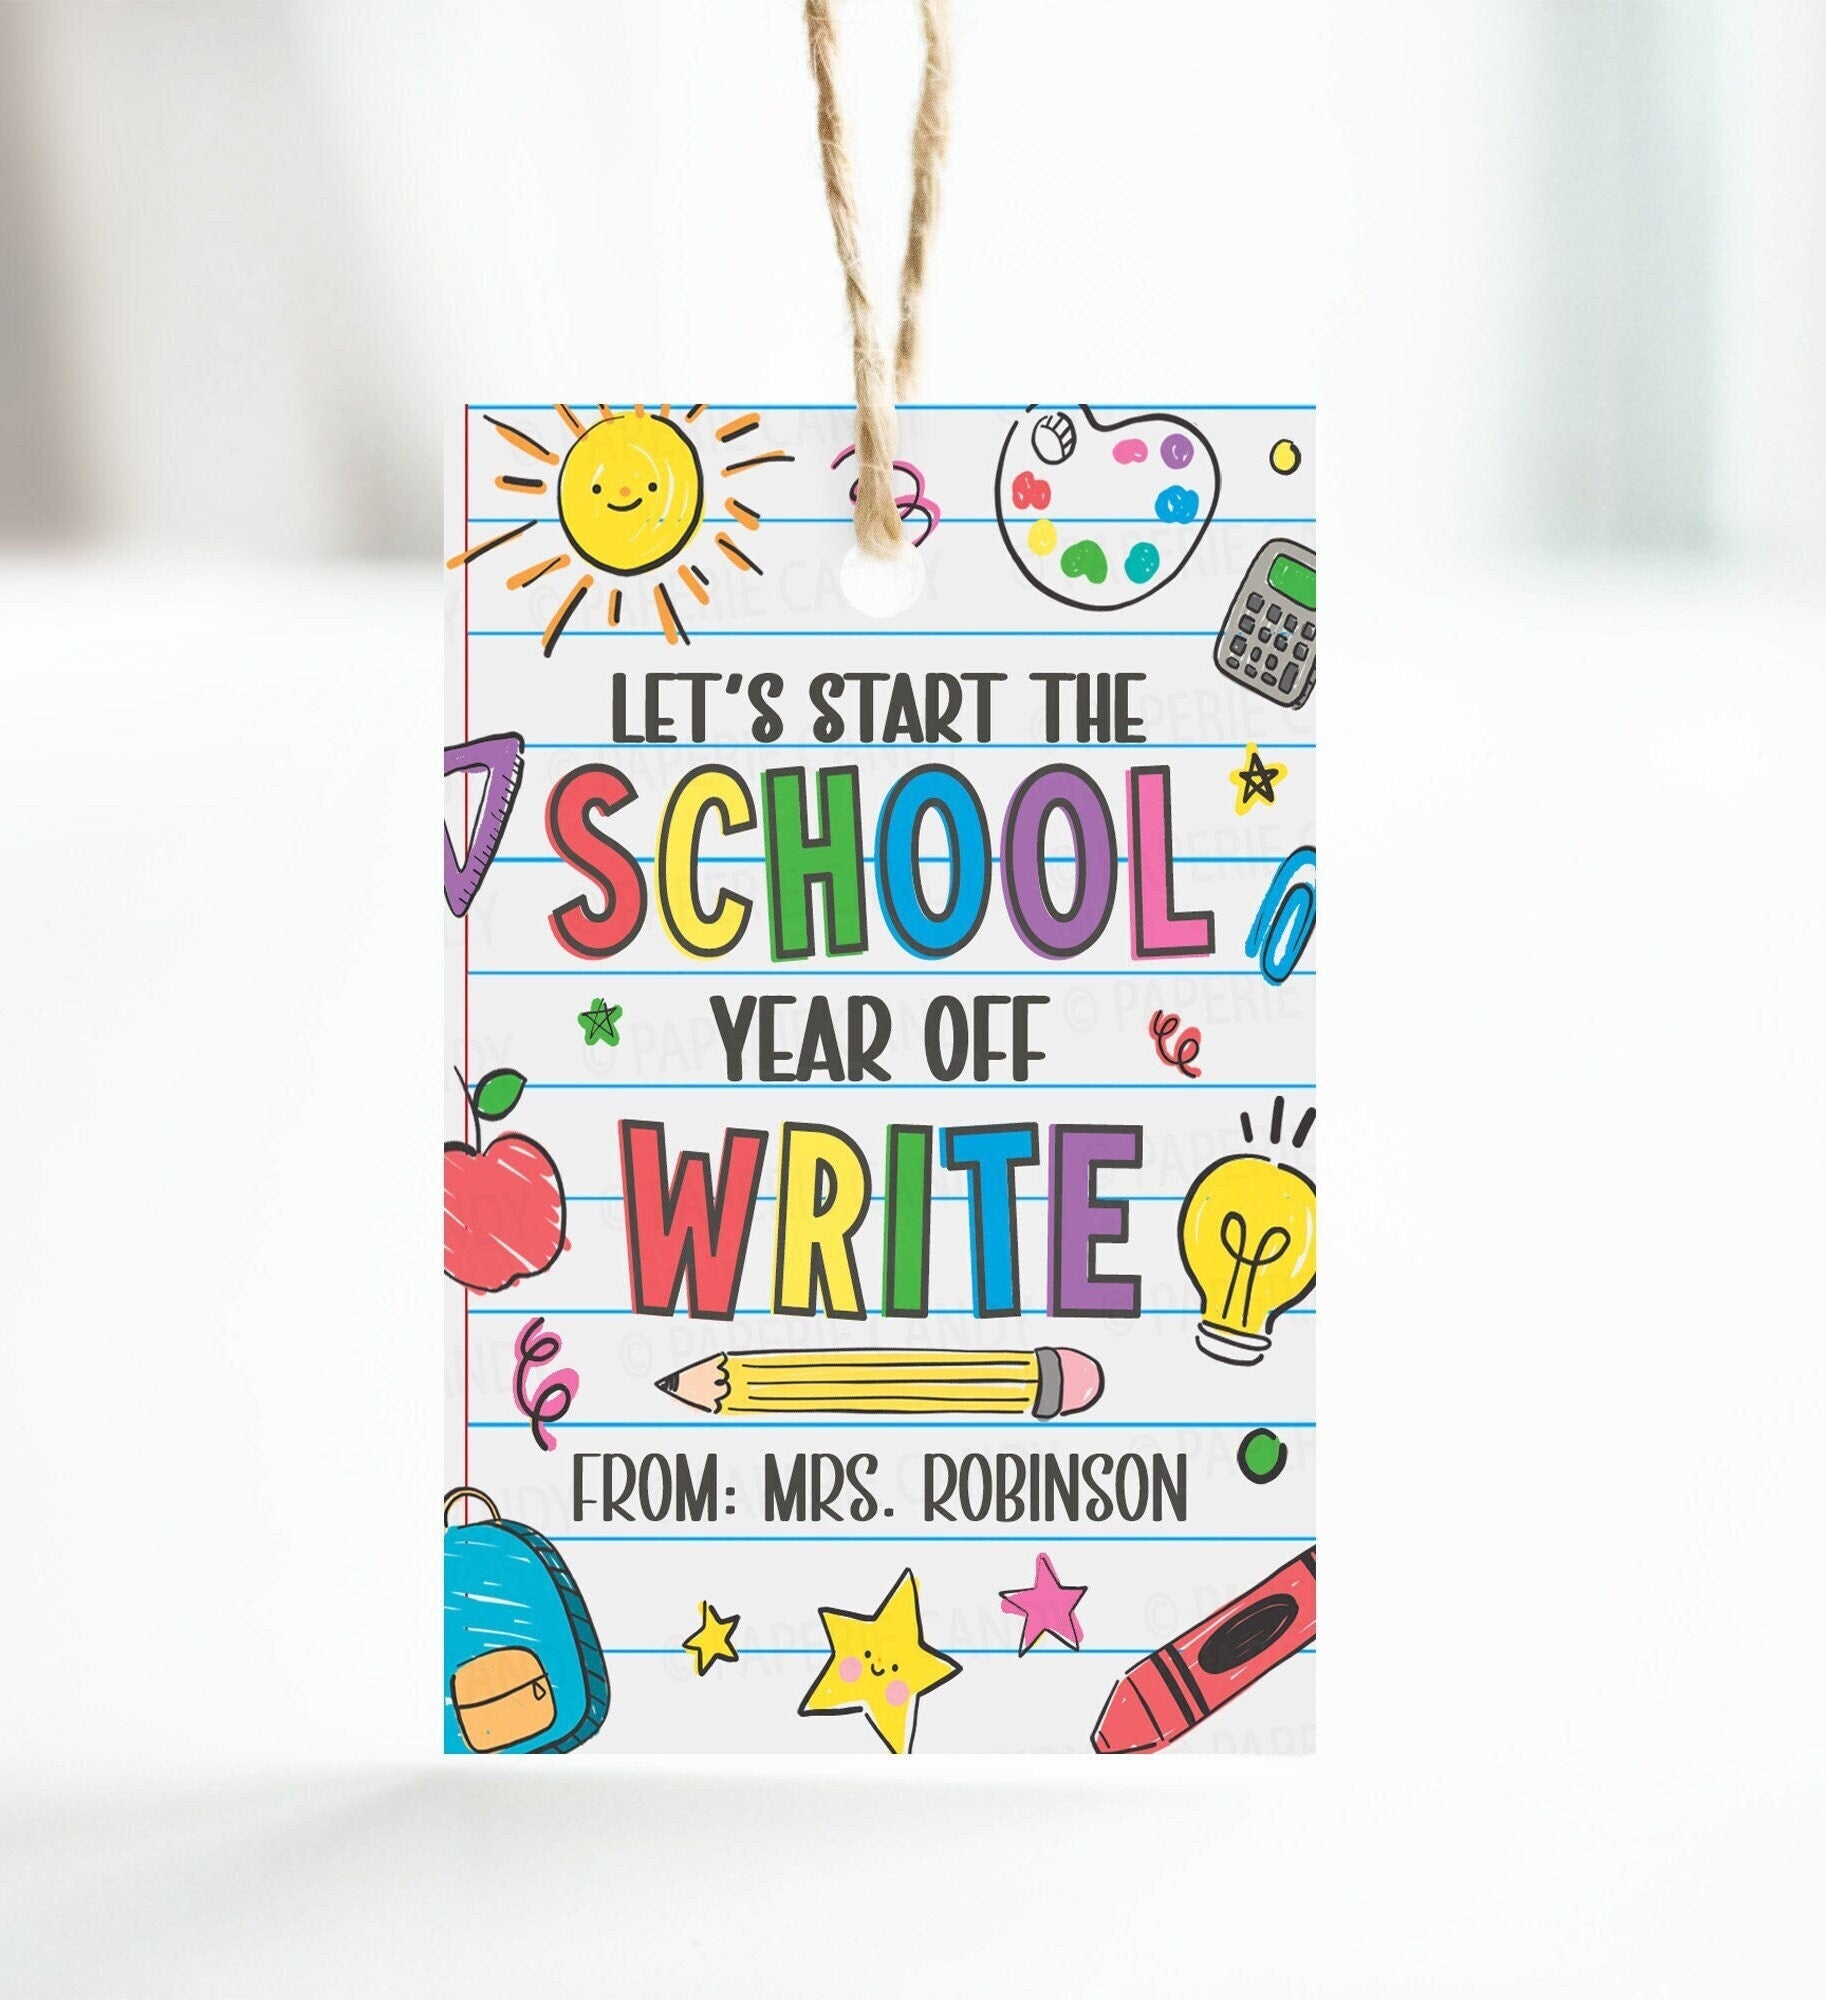 2 Circle Tags - Welcome Back to School